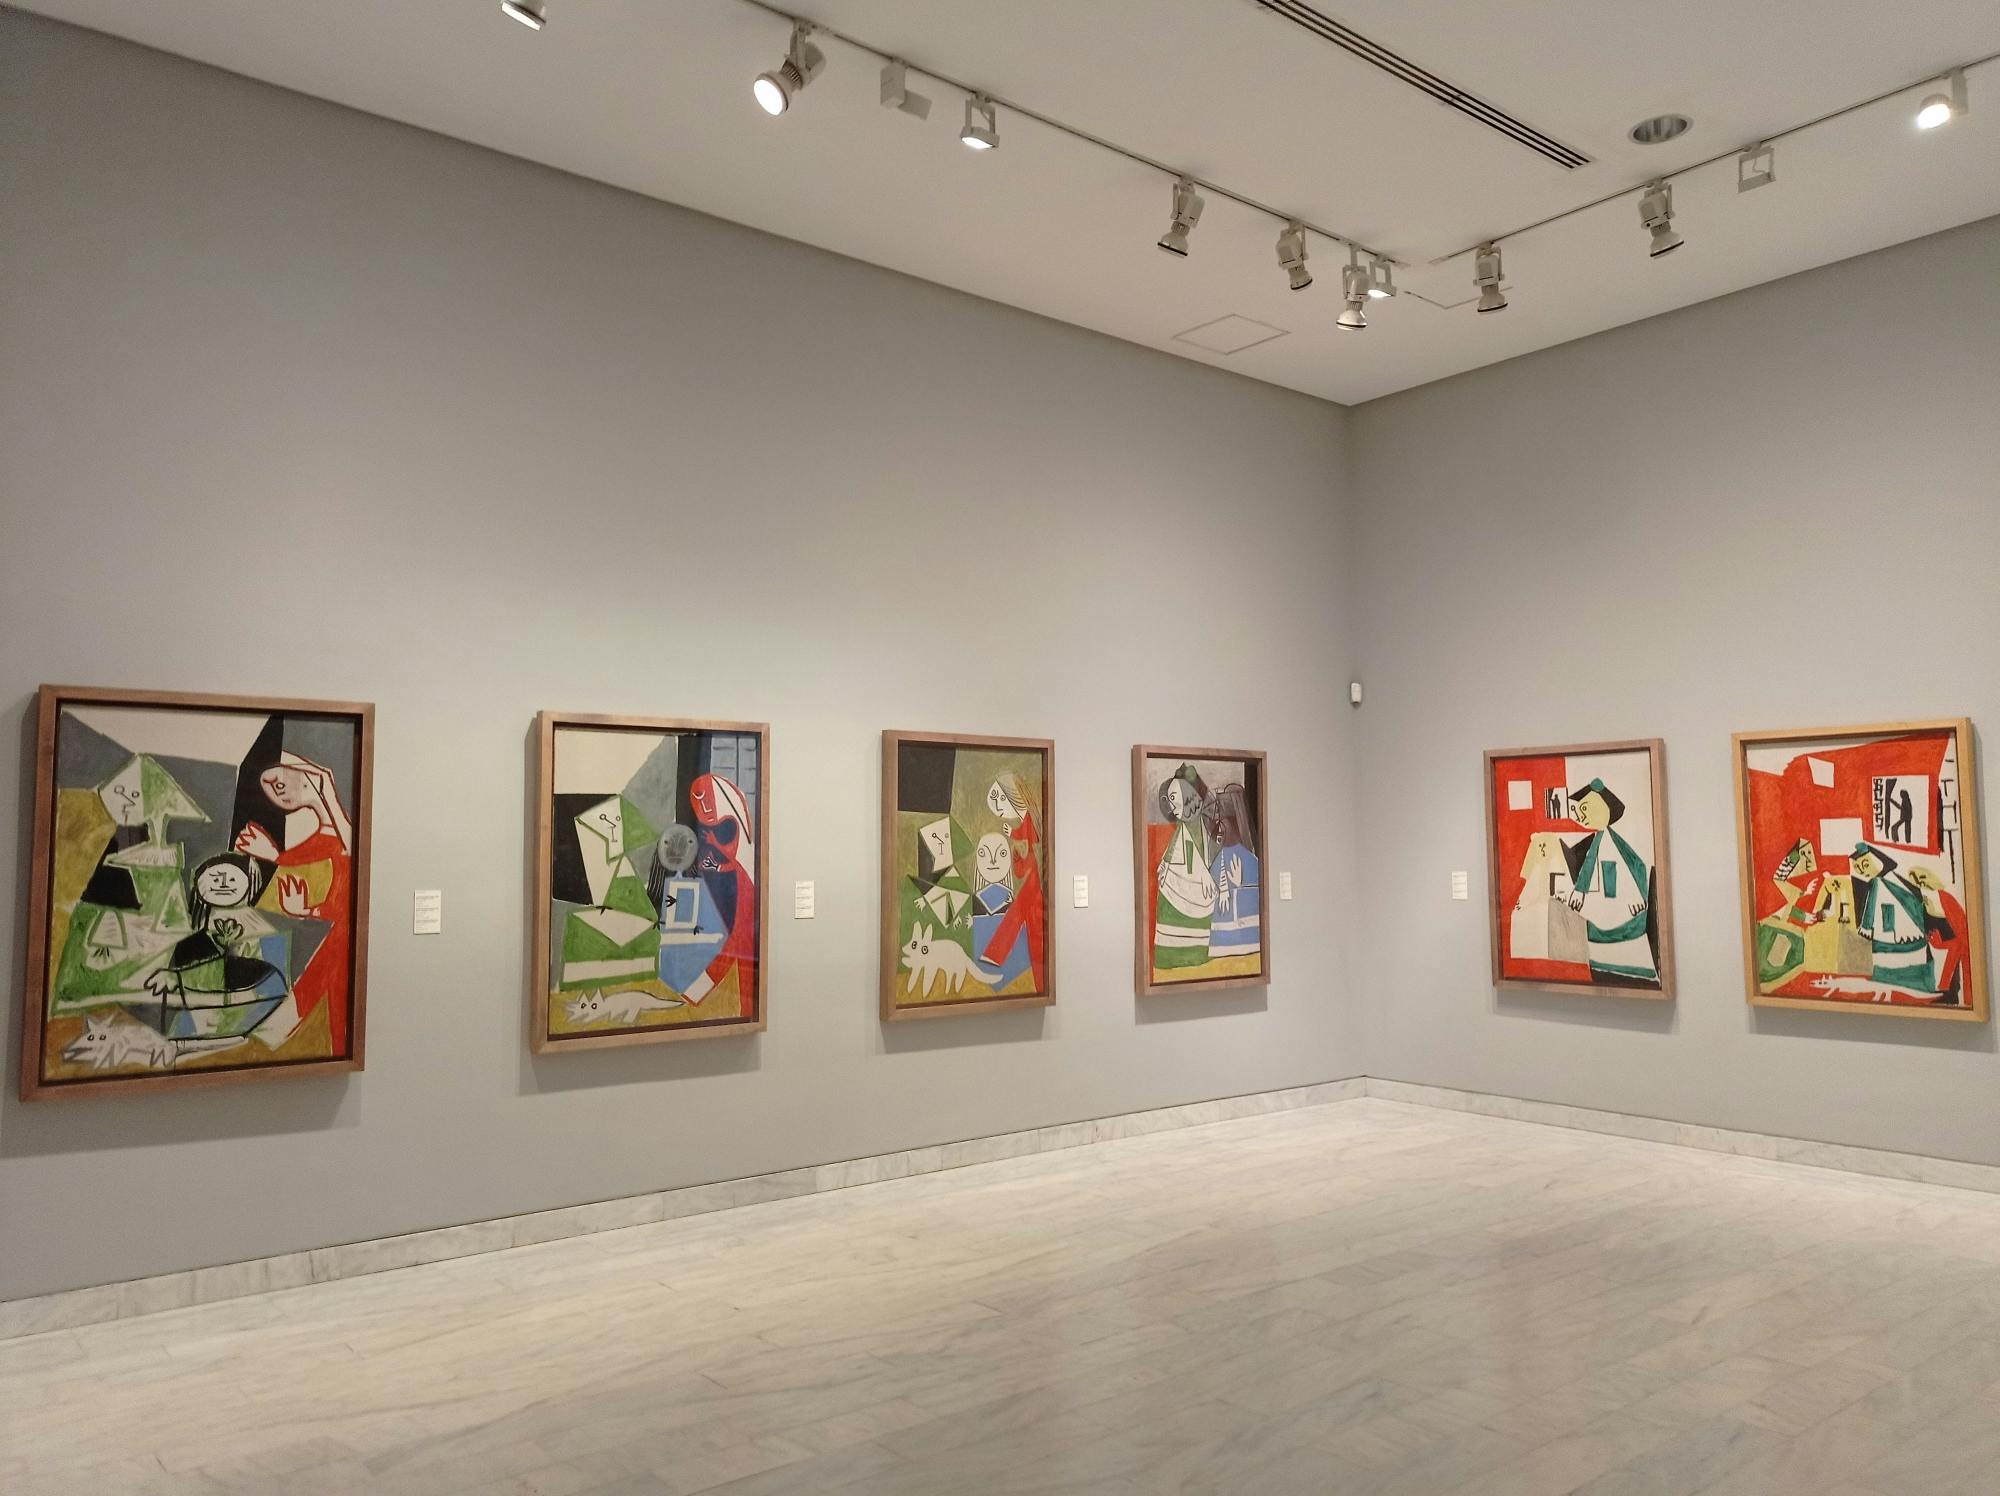 Picasso Museum of Barcelona guided tour with skip-the-line tickets